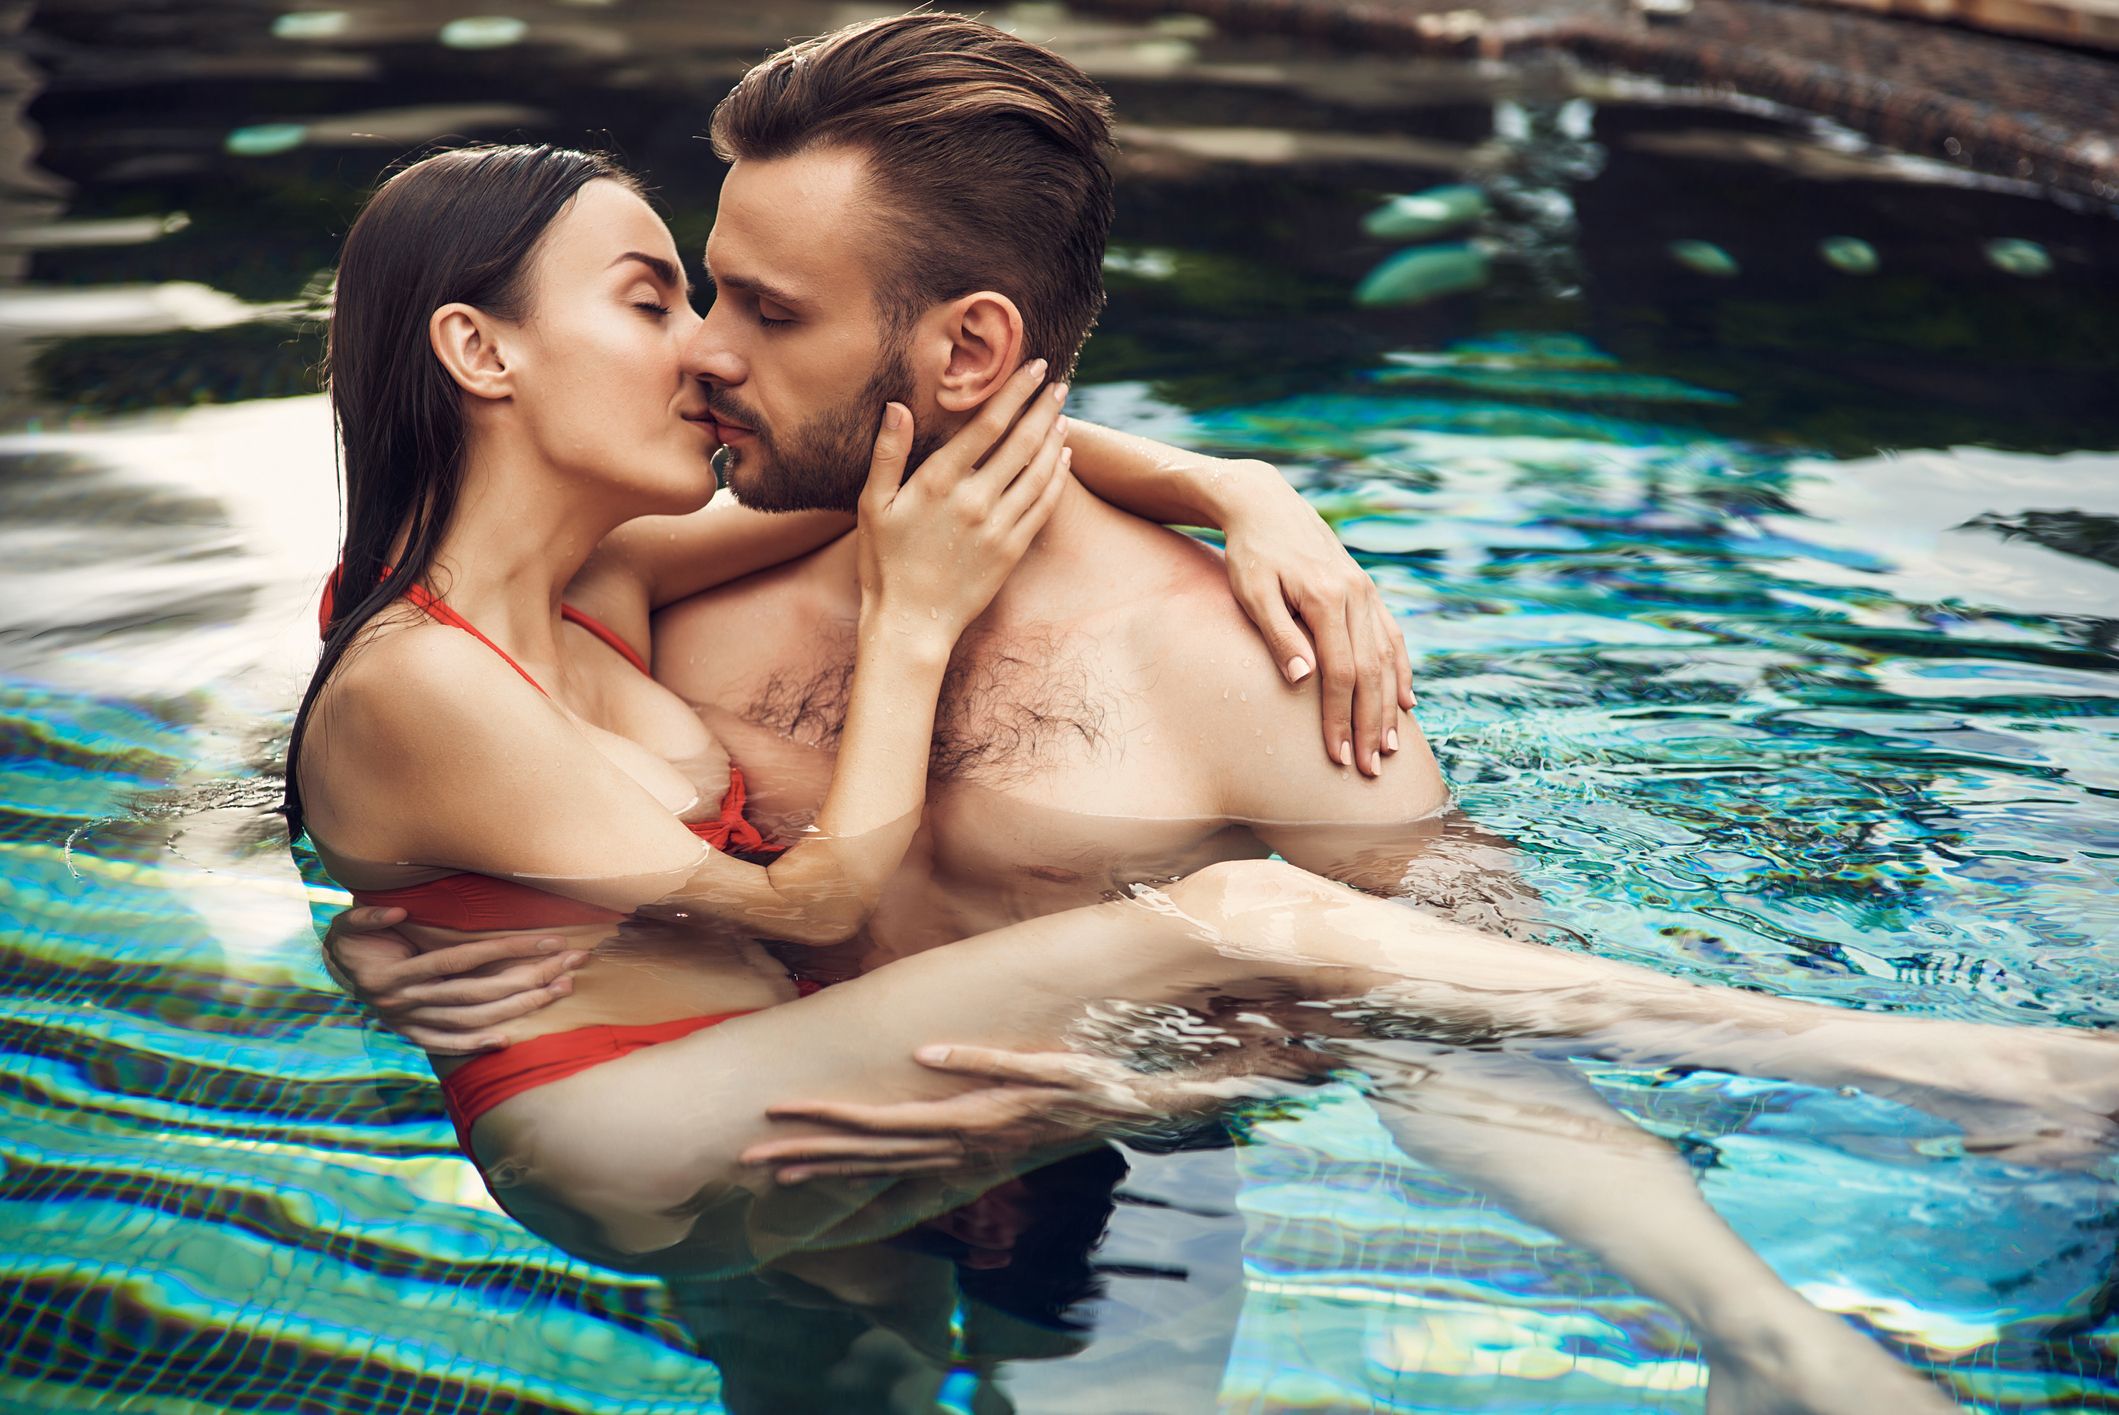 The Best Underwater Sex Tips and Positions, According to Experts